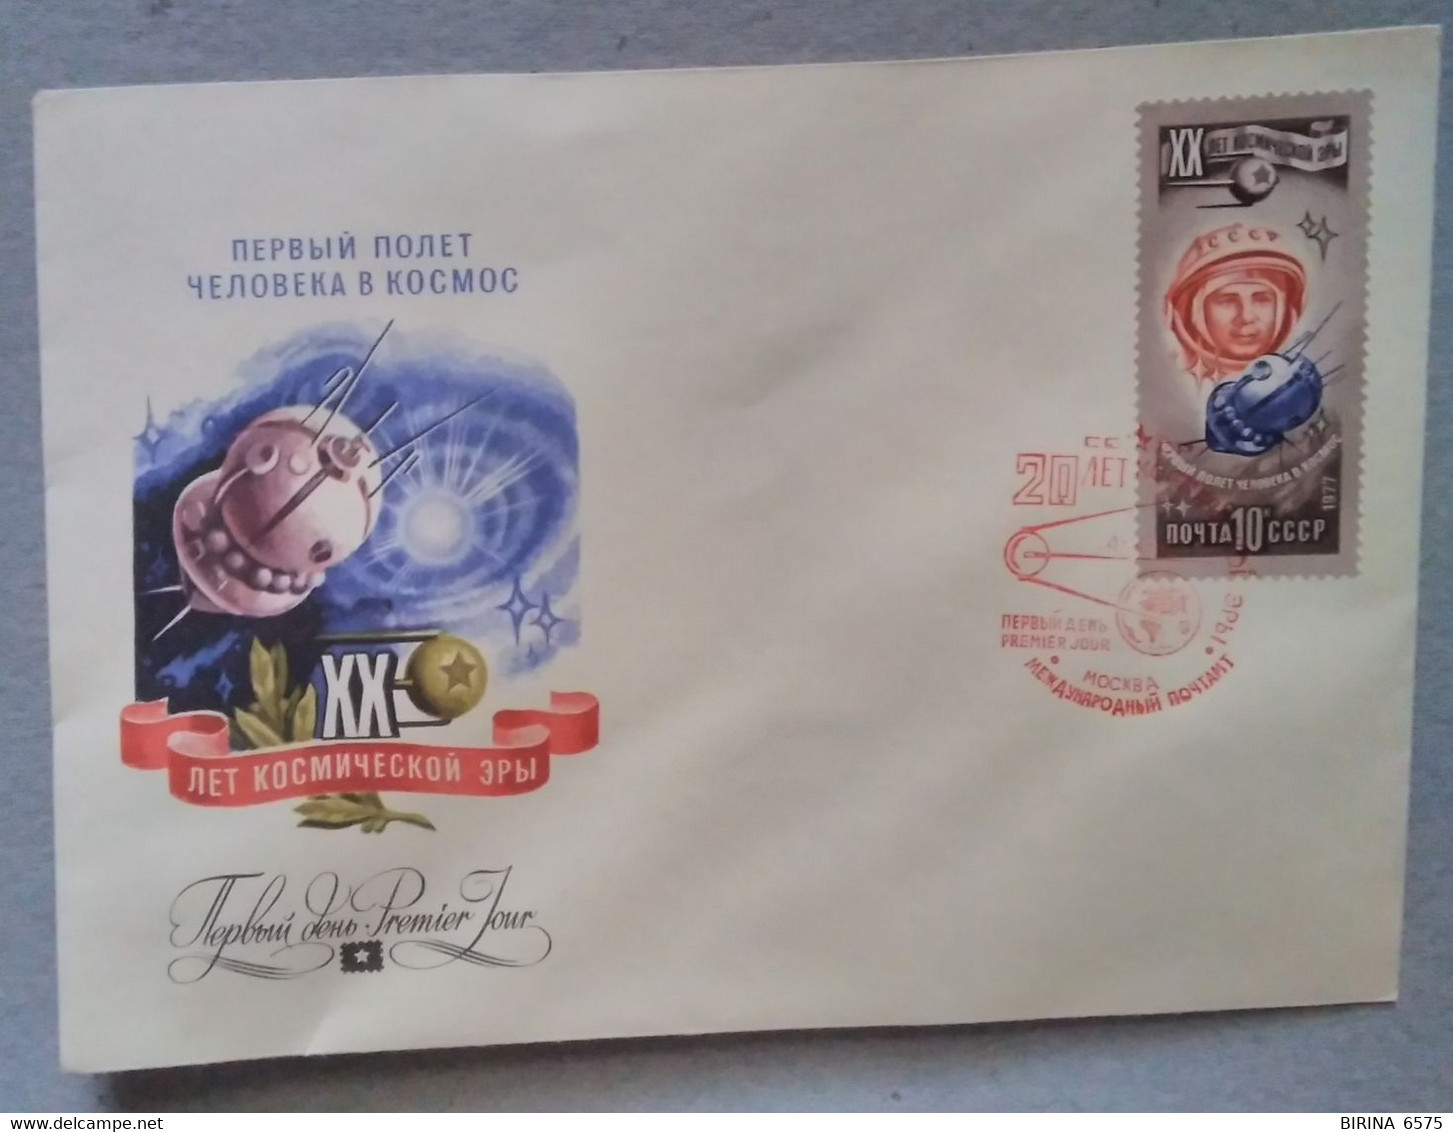 Astronautics. Cosmos. First Day. 1977. Stamp. Postal Envelope. Special Cancellation. ХХ Years Of The Space Age The USSR. - Sammlungen